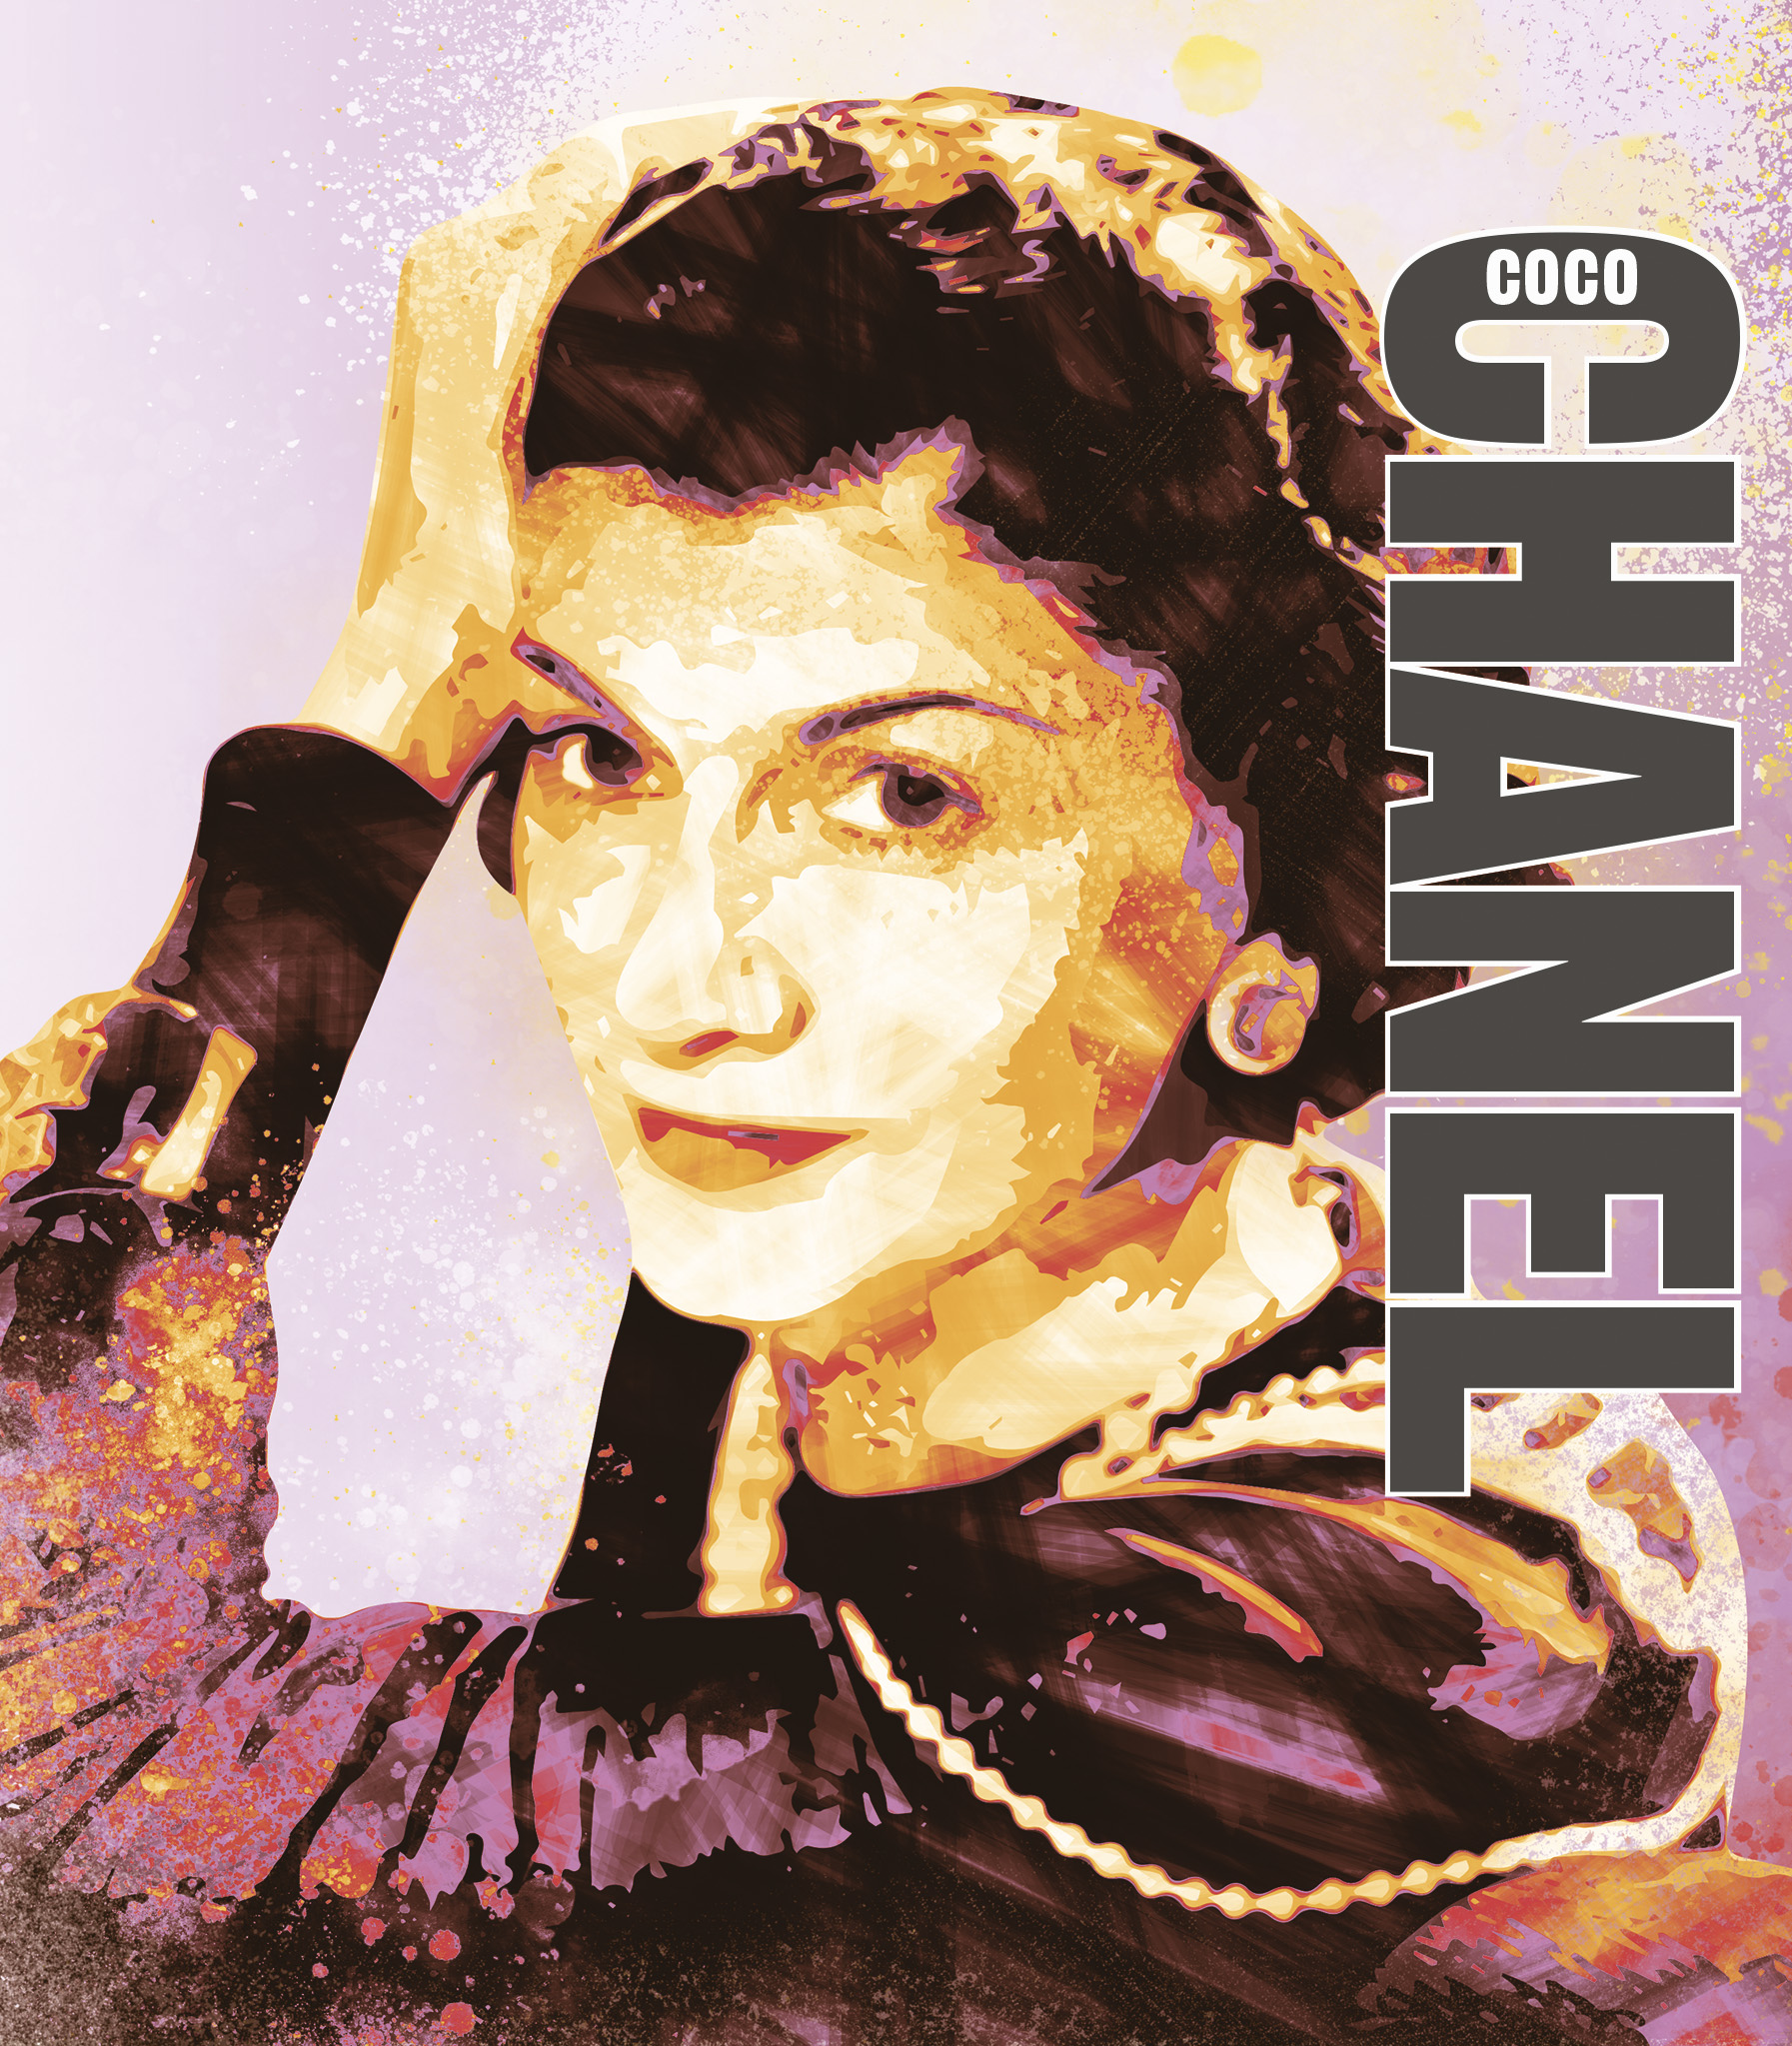 Coco Chanel - Entrepreneurs Who Changed History [Book]